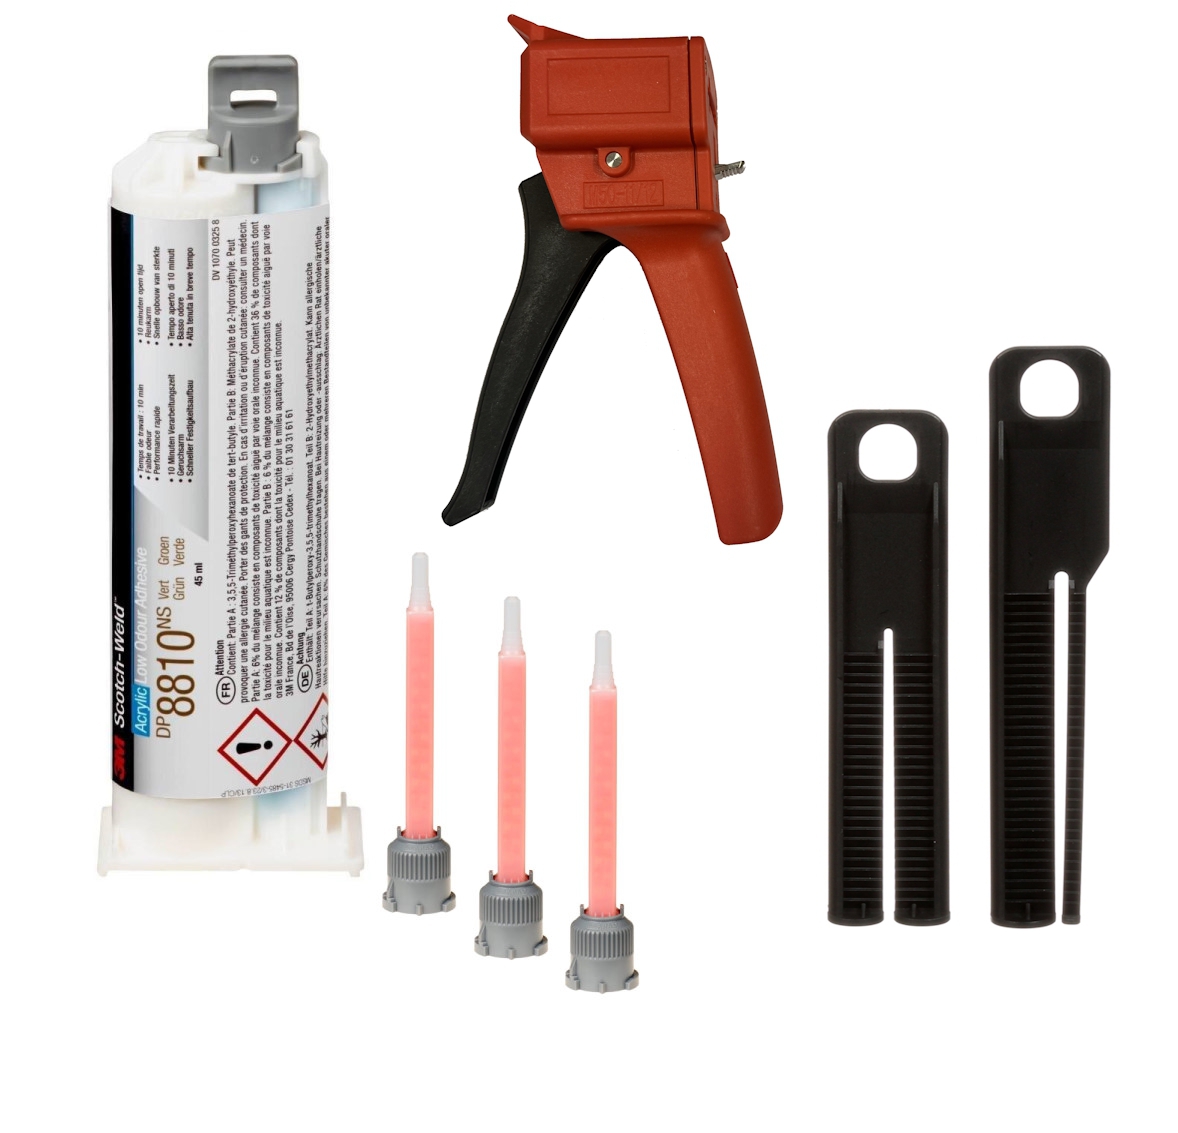 Starter set: 1x 3M Scotch-Weld 2-component construction adhesive EPX System DP8810NS, green, 45 ml 1x S-K-S hand tool for EPX 38 to 50 ml cartridges incl. feed piston 2:1